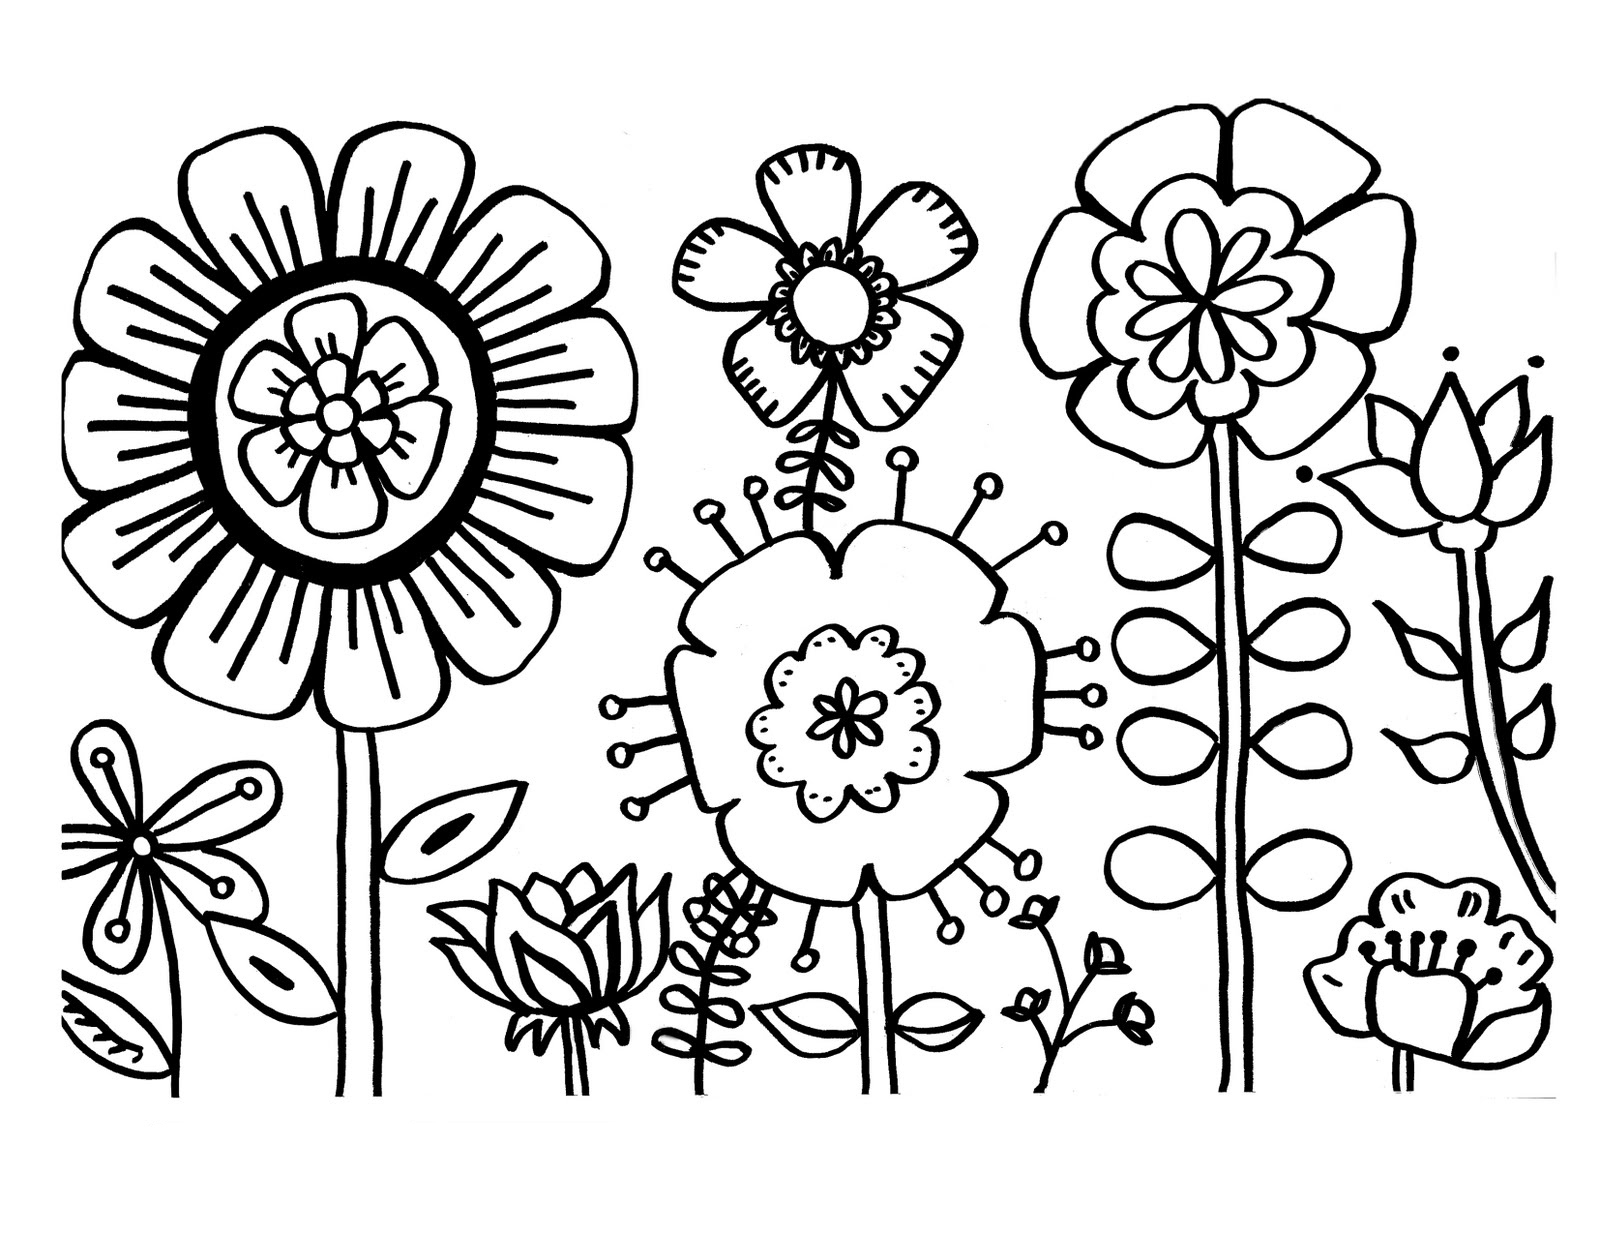 Flowers Coloring Pages - Kidsuki